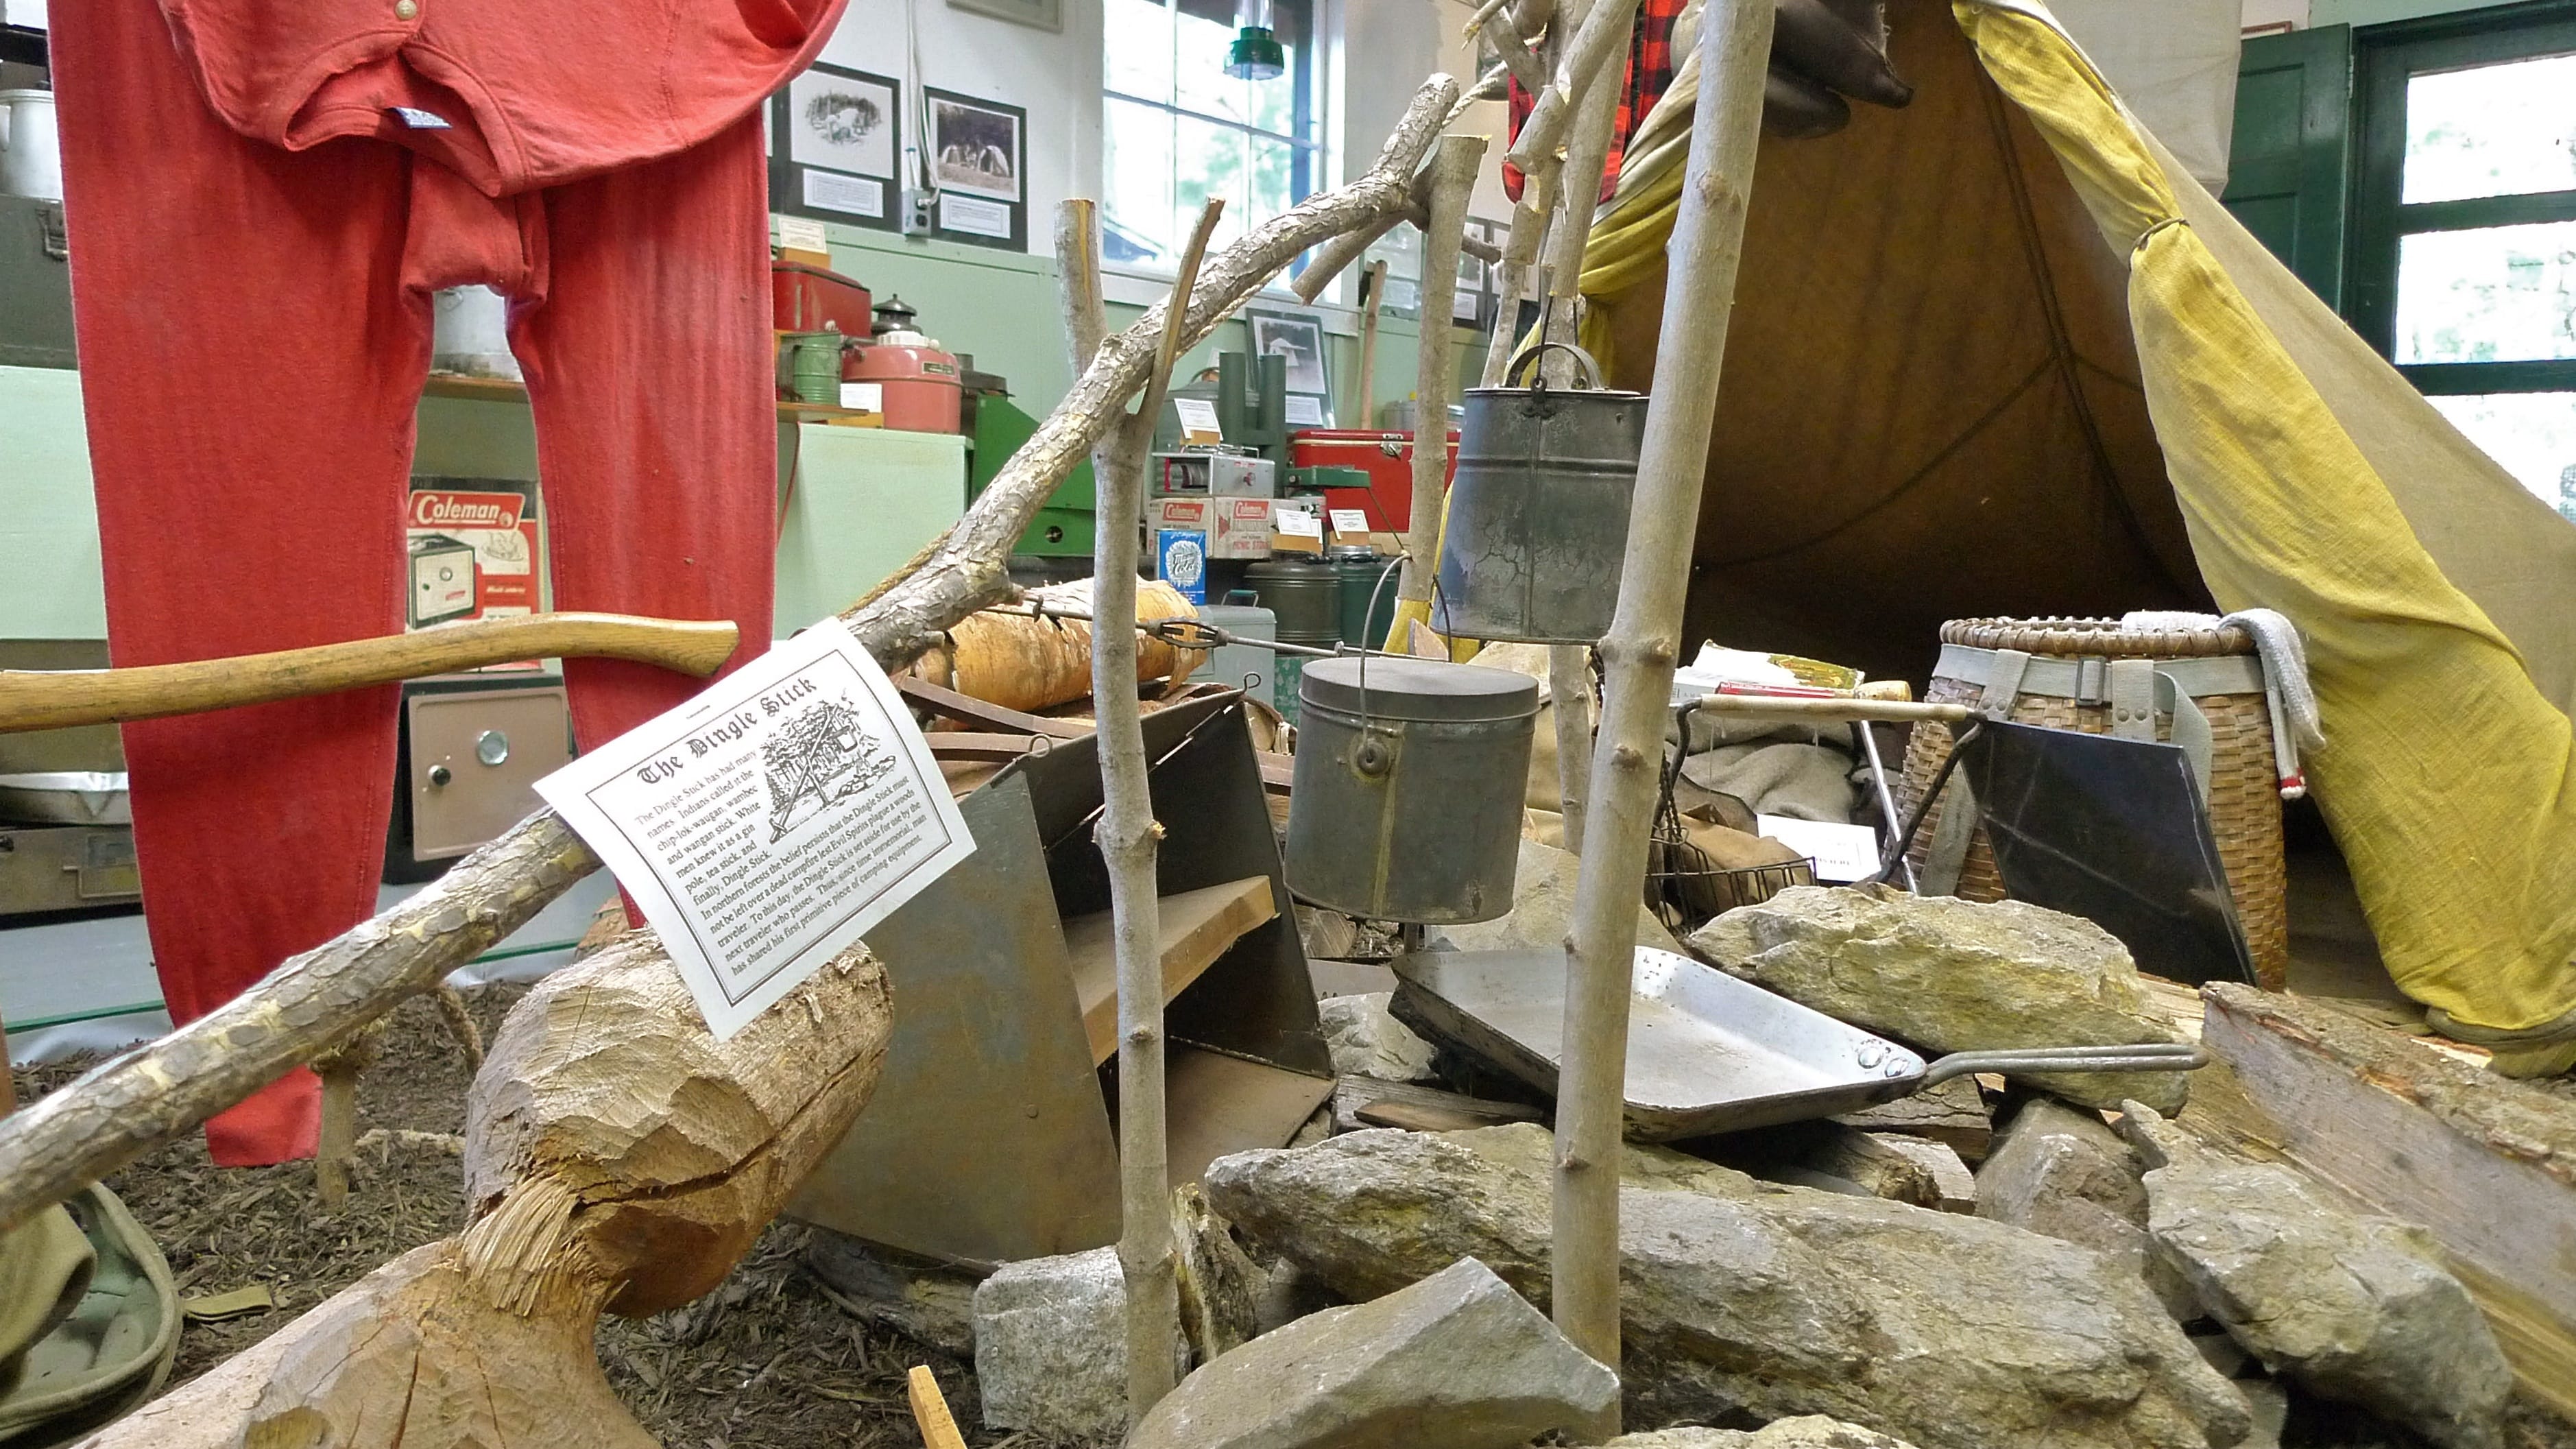 The interior displays at the Museum of Family Camping celebrated many generations of camping history. My docent made much of the dingle stick (the vertical stick that holds the cooking tin); good manners demanded they be left at the camp site for the next camper.